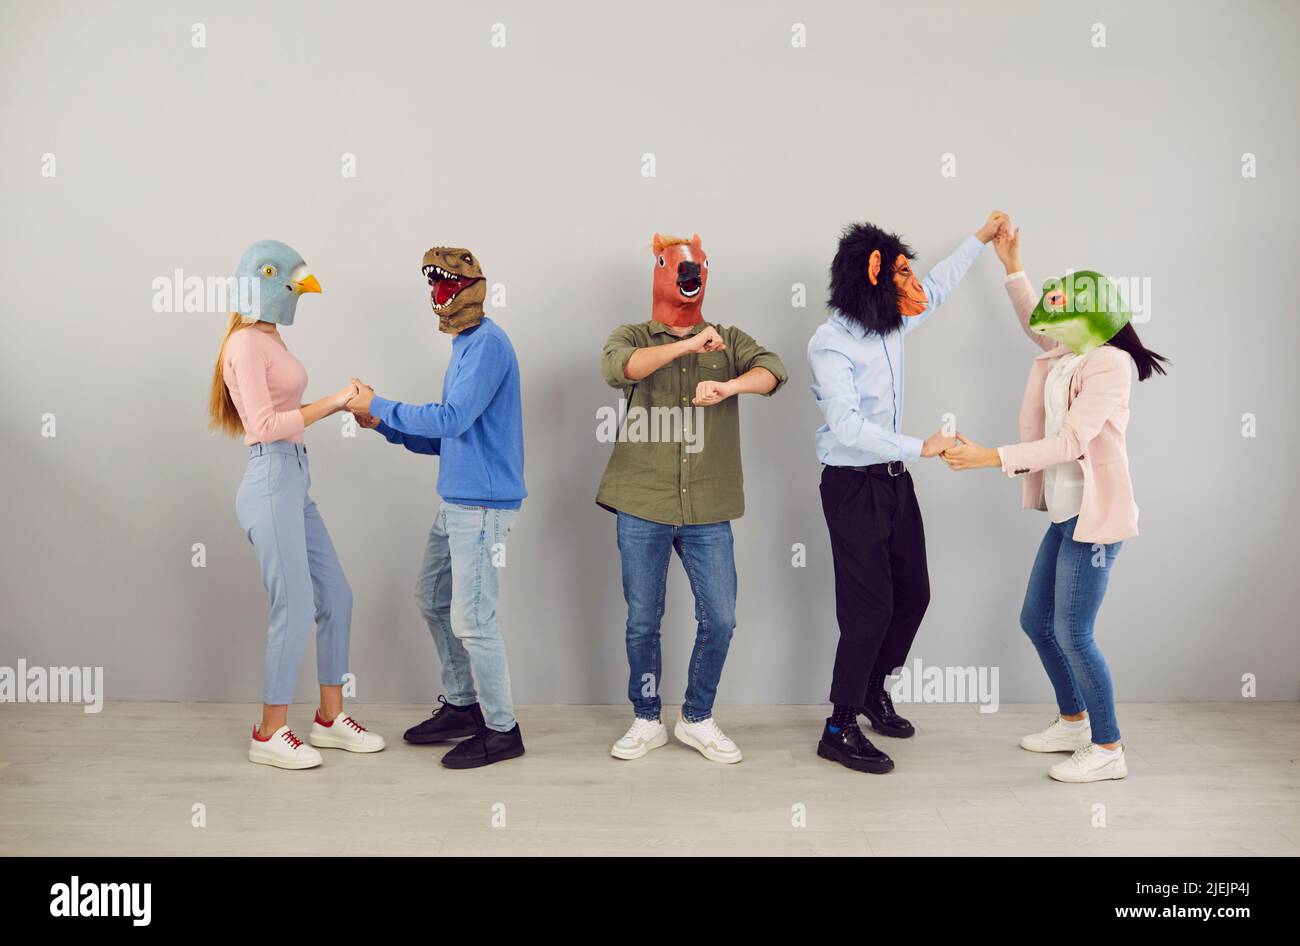 Funny people in animal masks dancing together Stock Photo